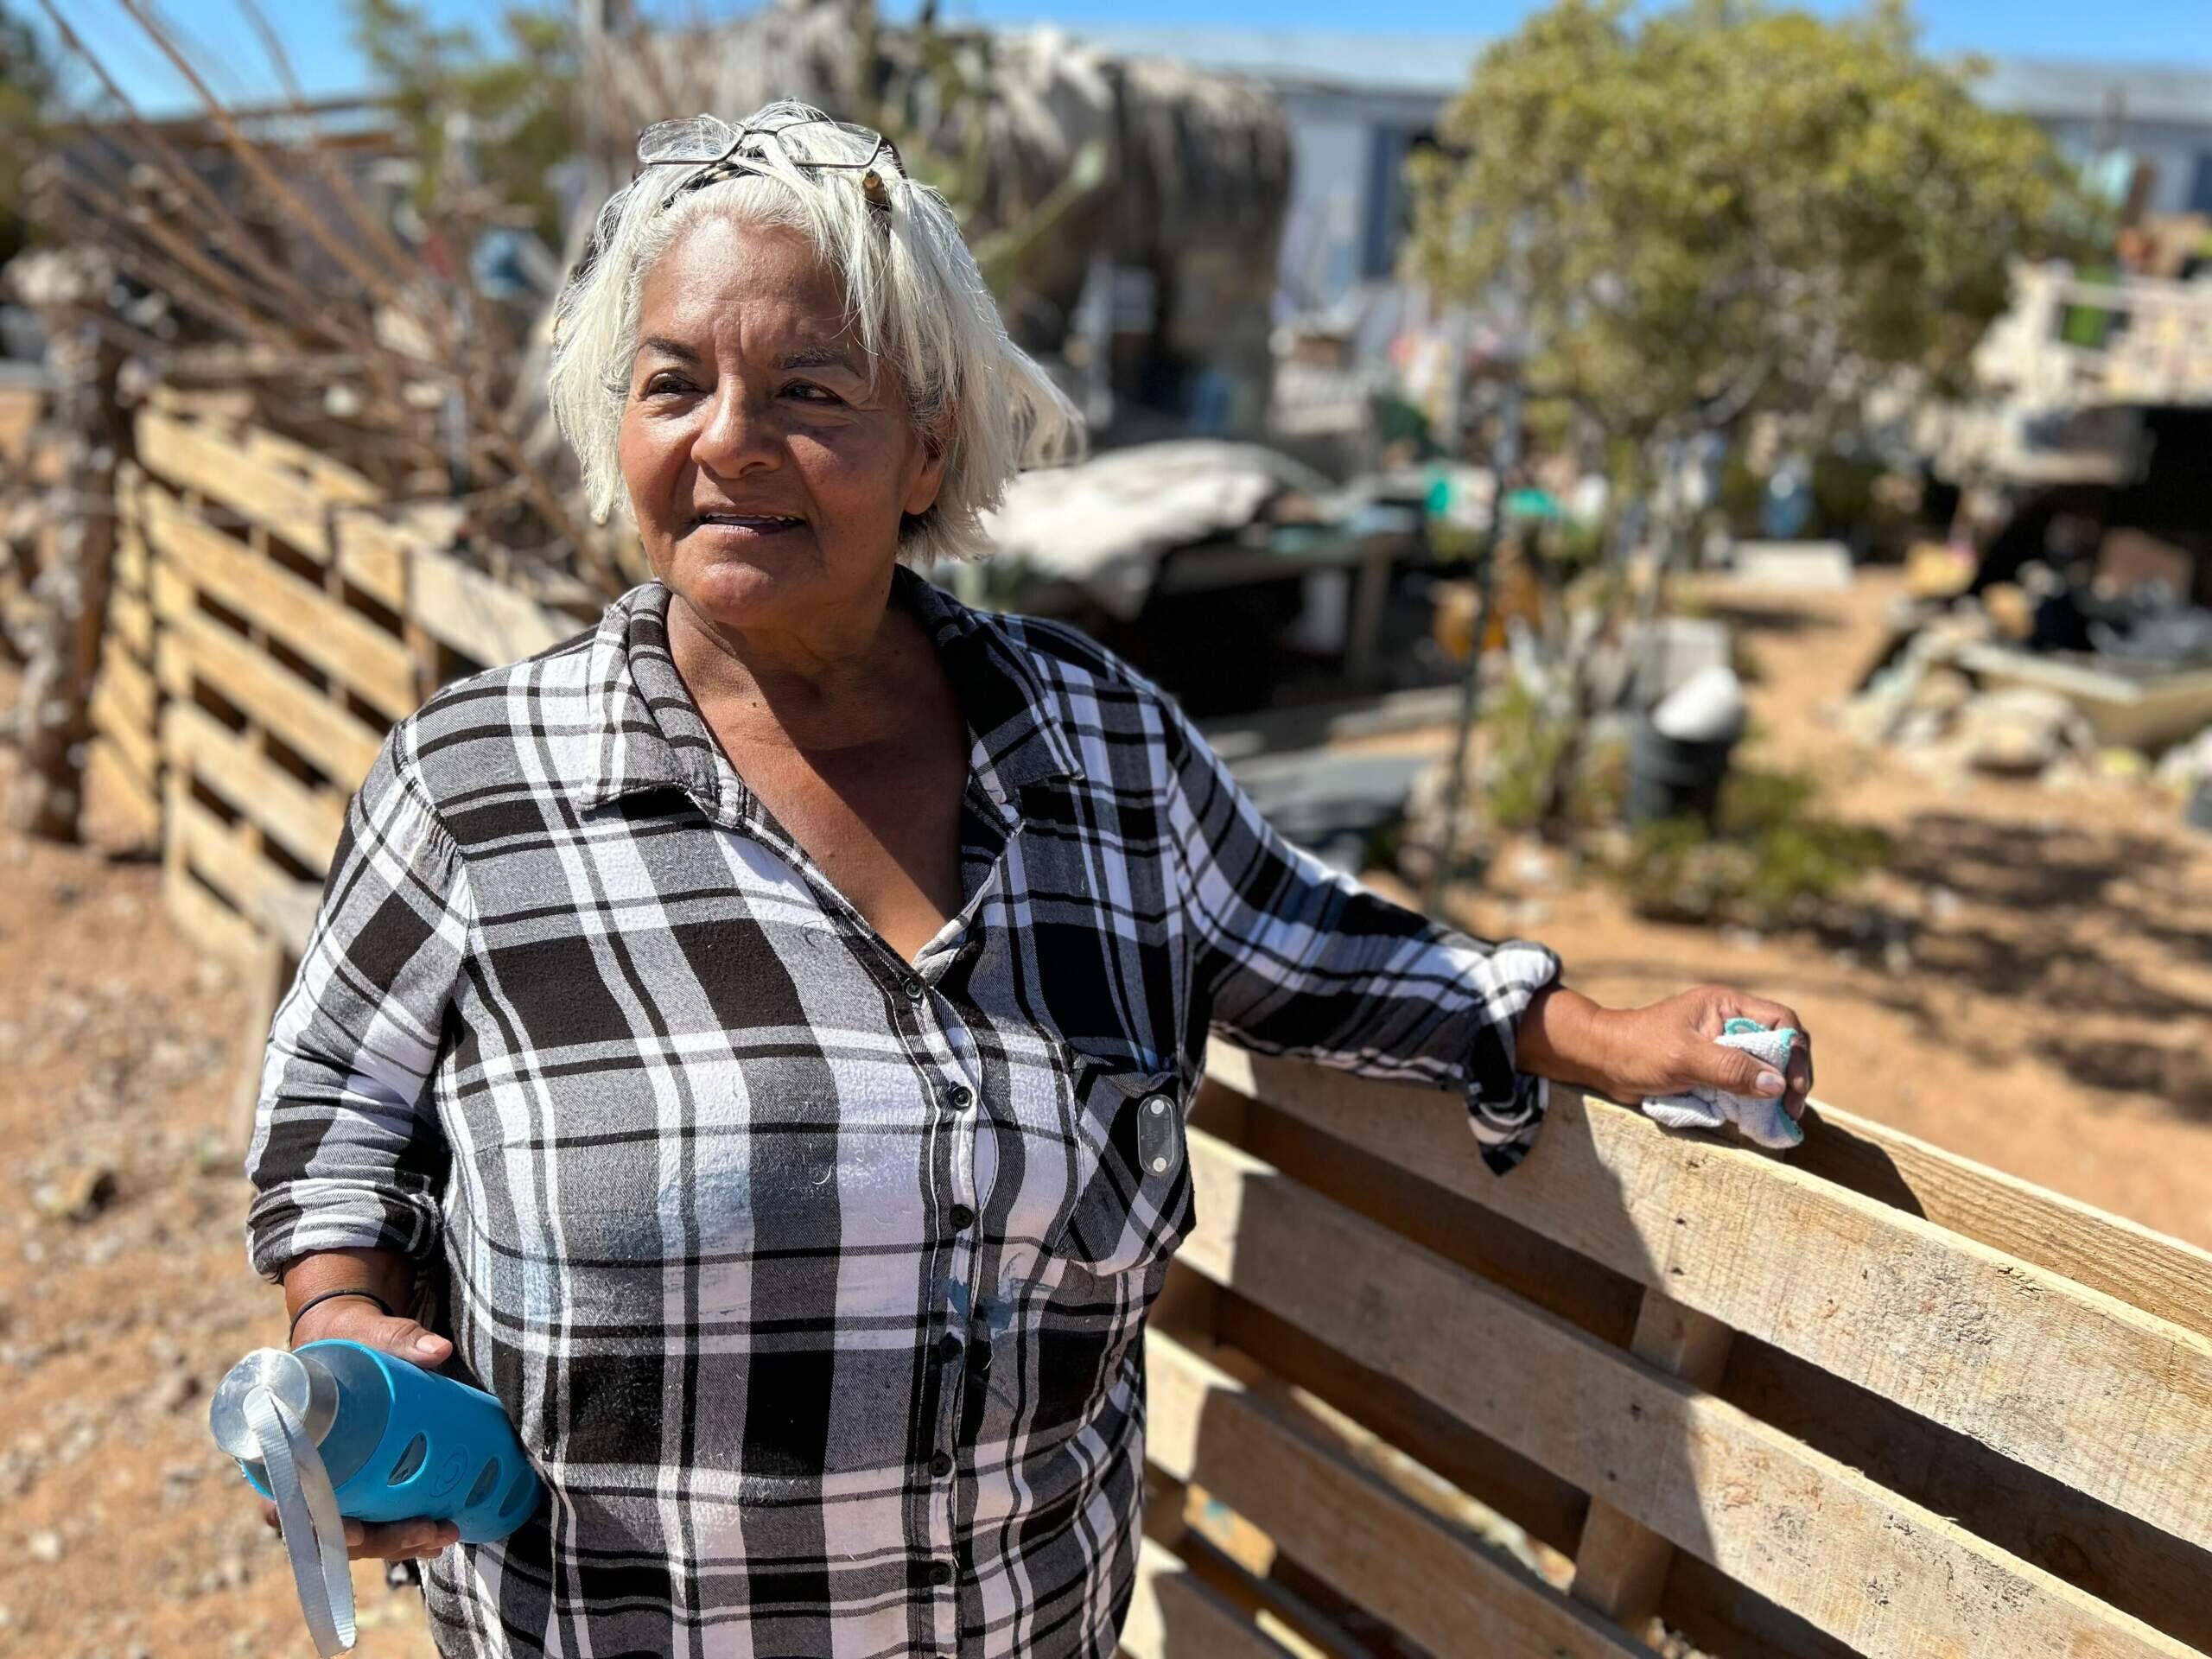 Olga Thomas outside her home in Hueco Tanks, Texas, where residents must haul water from town for drinking, cooking and bathing. (Peter O'Dowd/Here & Now)